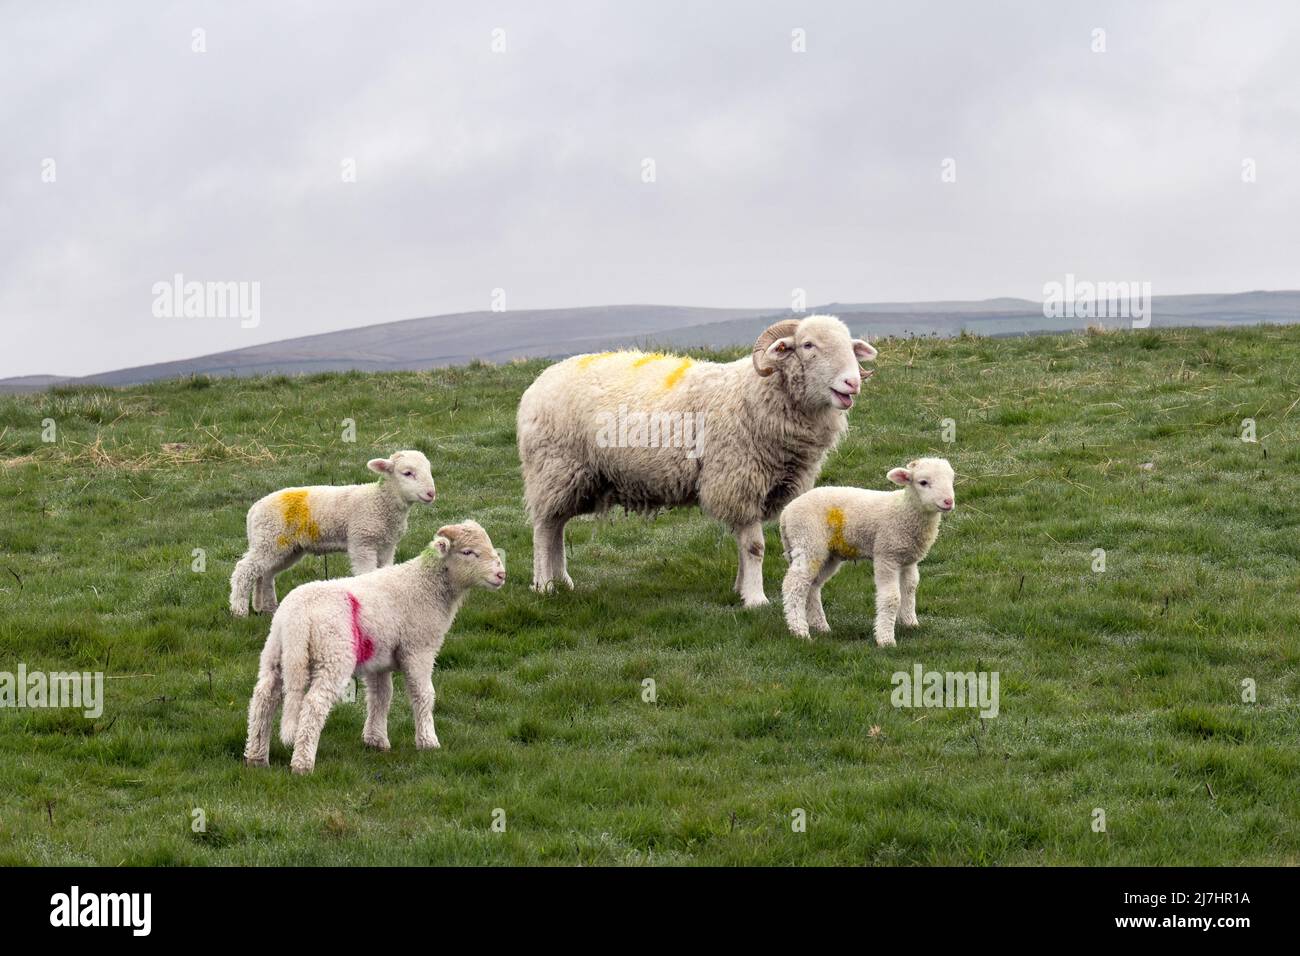 A Whitefaced Woodland ewe and her pedigree lambs, Stainforth, North Yorkshire, UK. The Whitefaced Woodland is a rare breed of horned hill sheep. Stock Photo